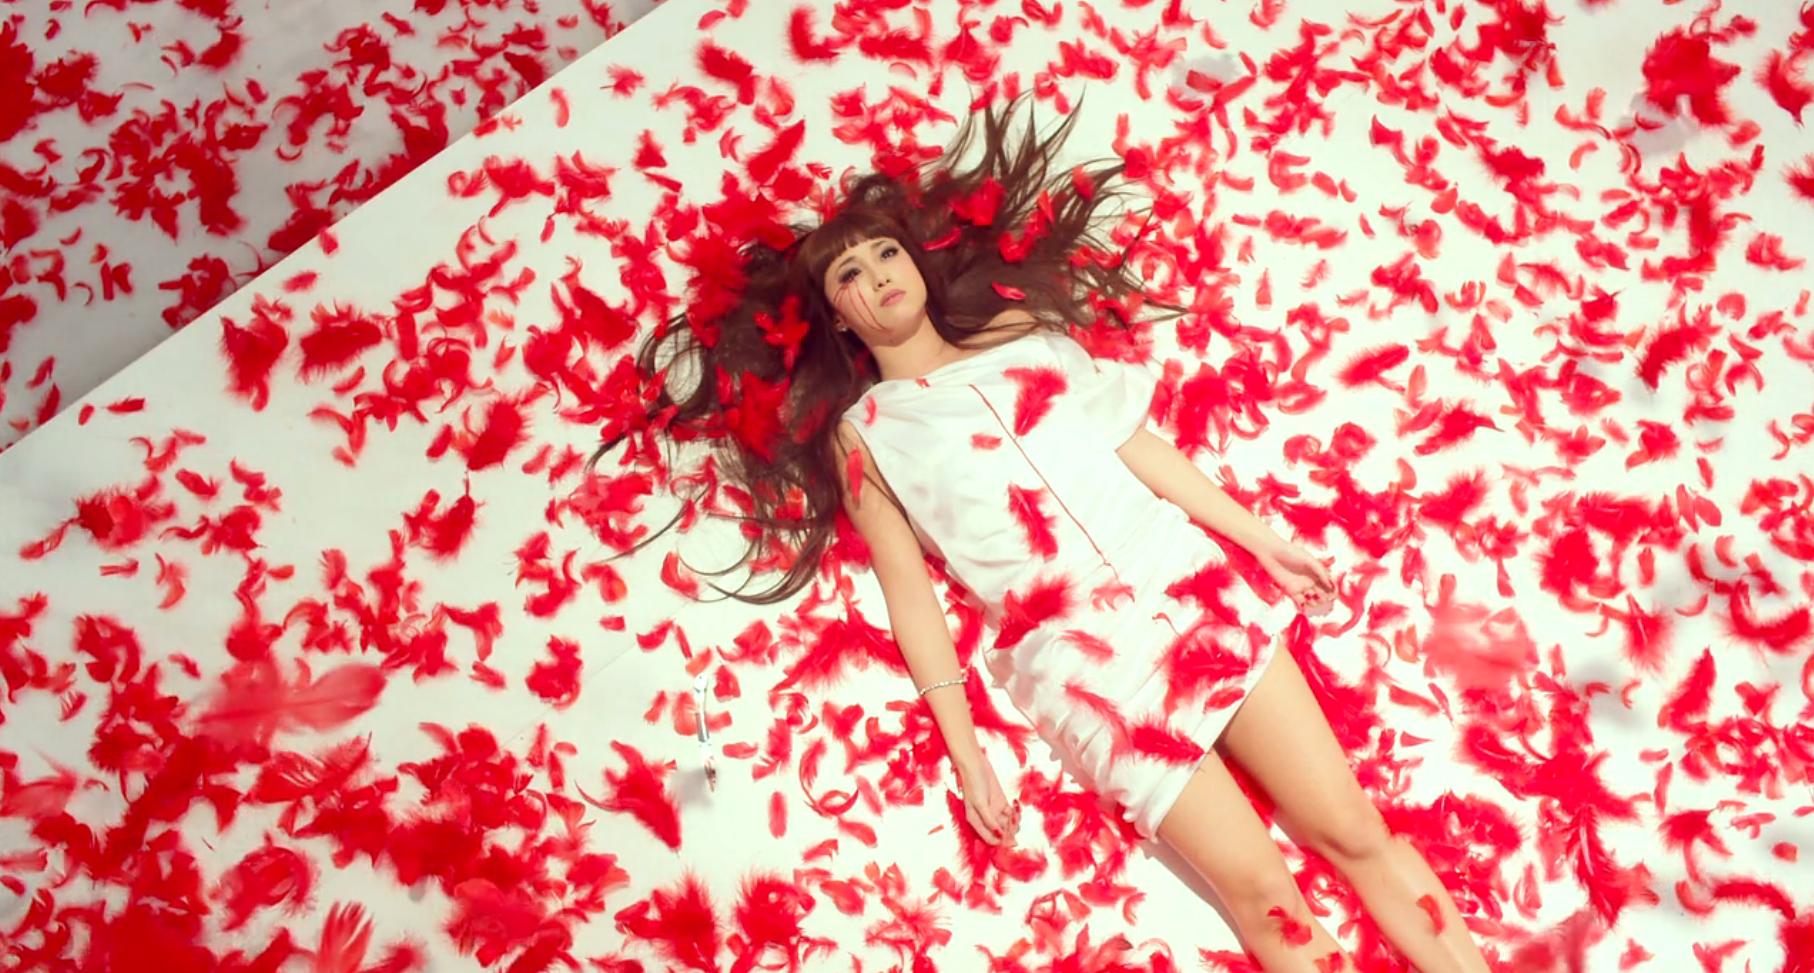 Woman dressed in white surrounded by red feathers